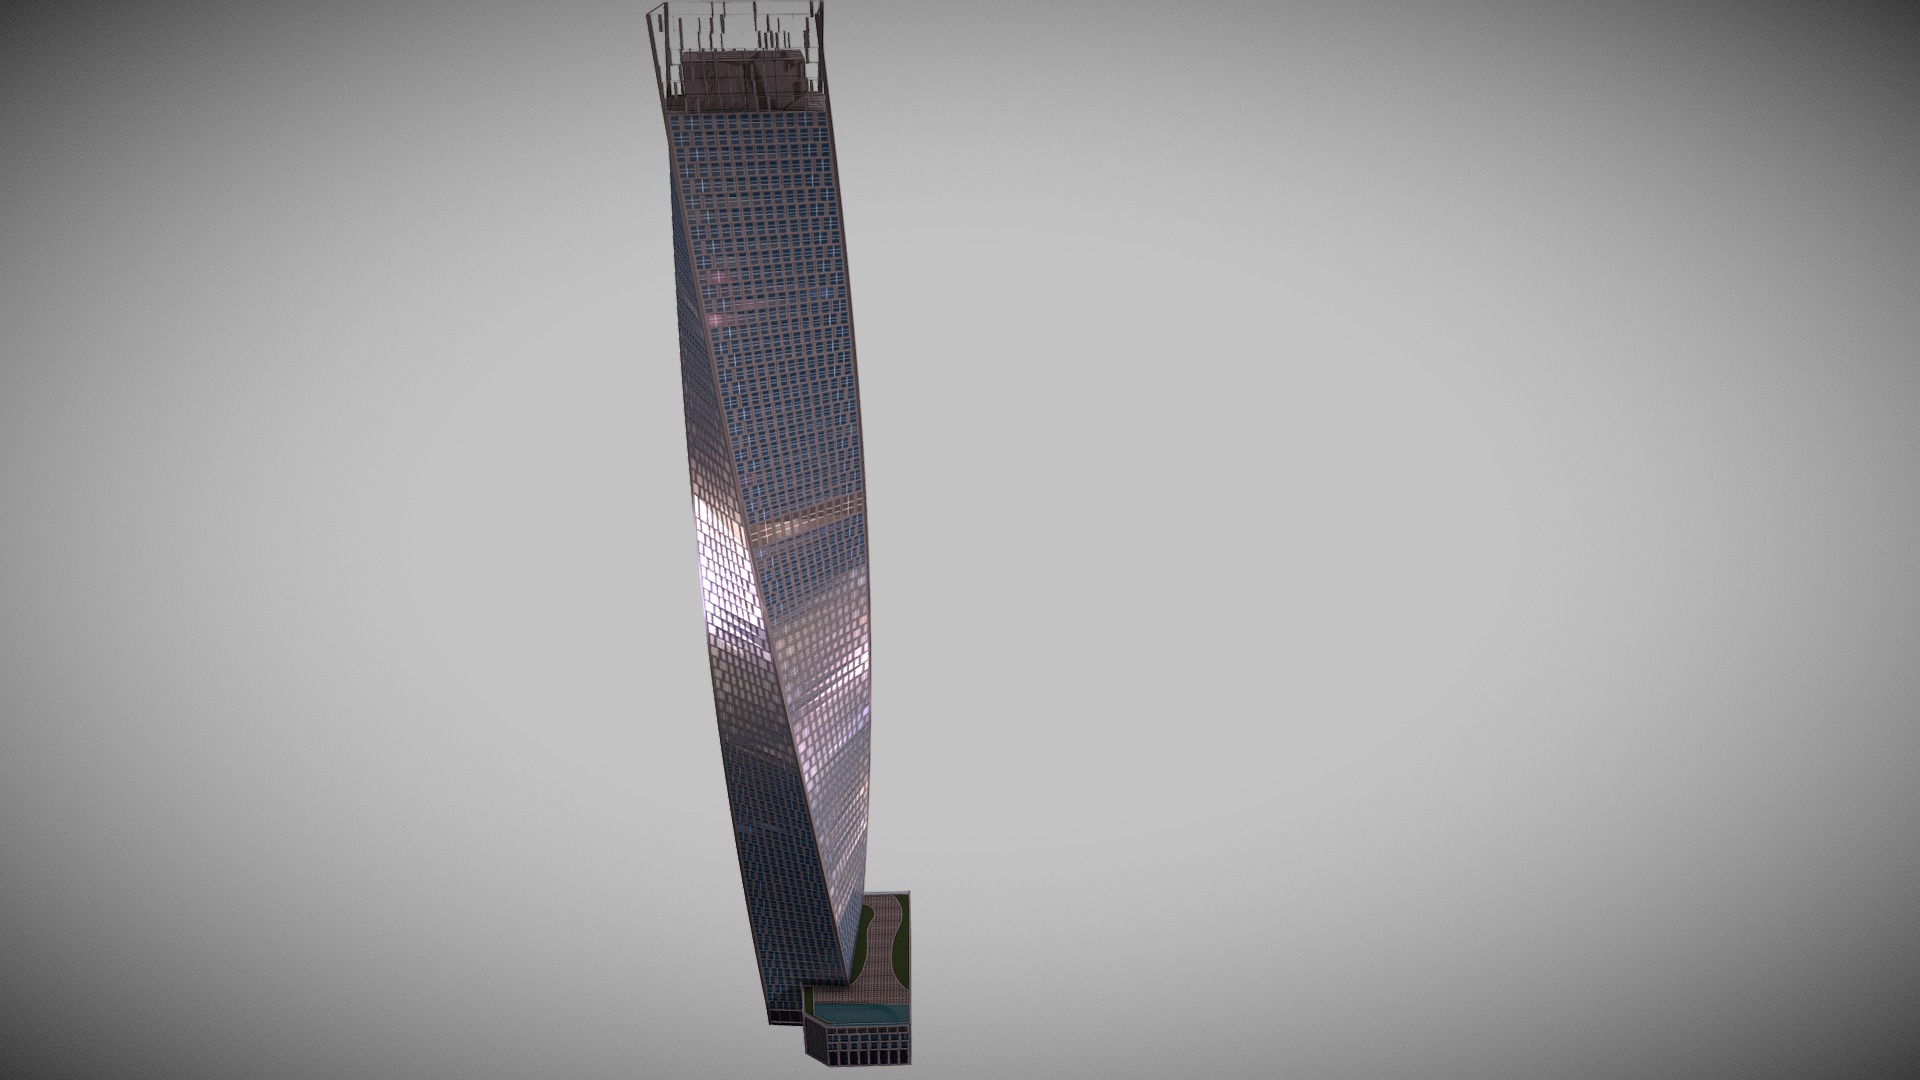 3D model Cayen Tower - This is a 3D model of the Cayen Tower. The 3D model is about a tall building with a tower.